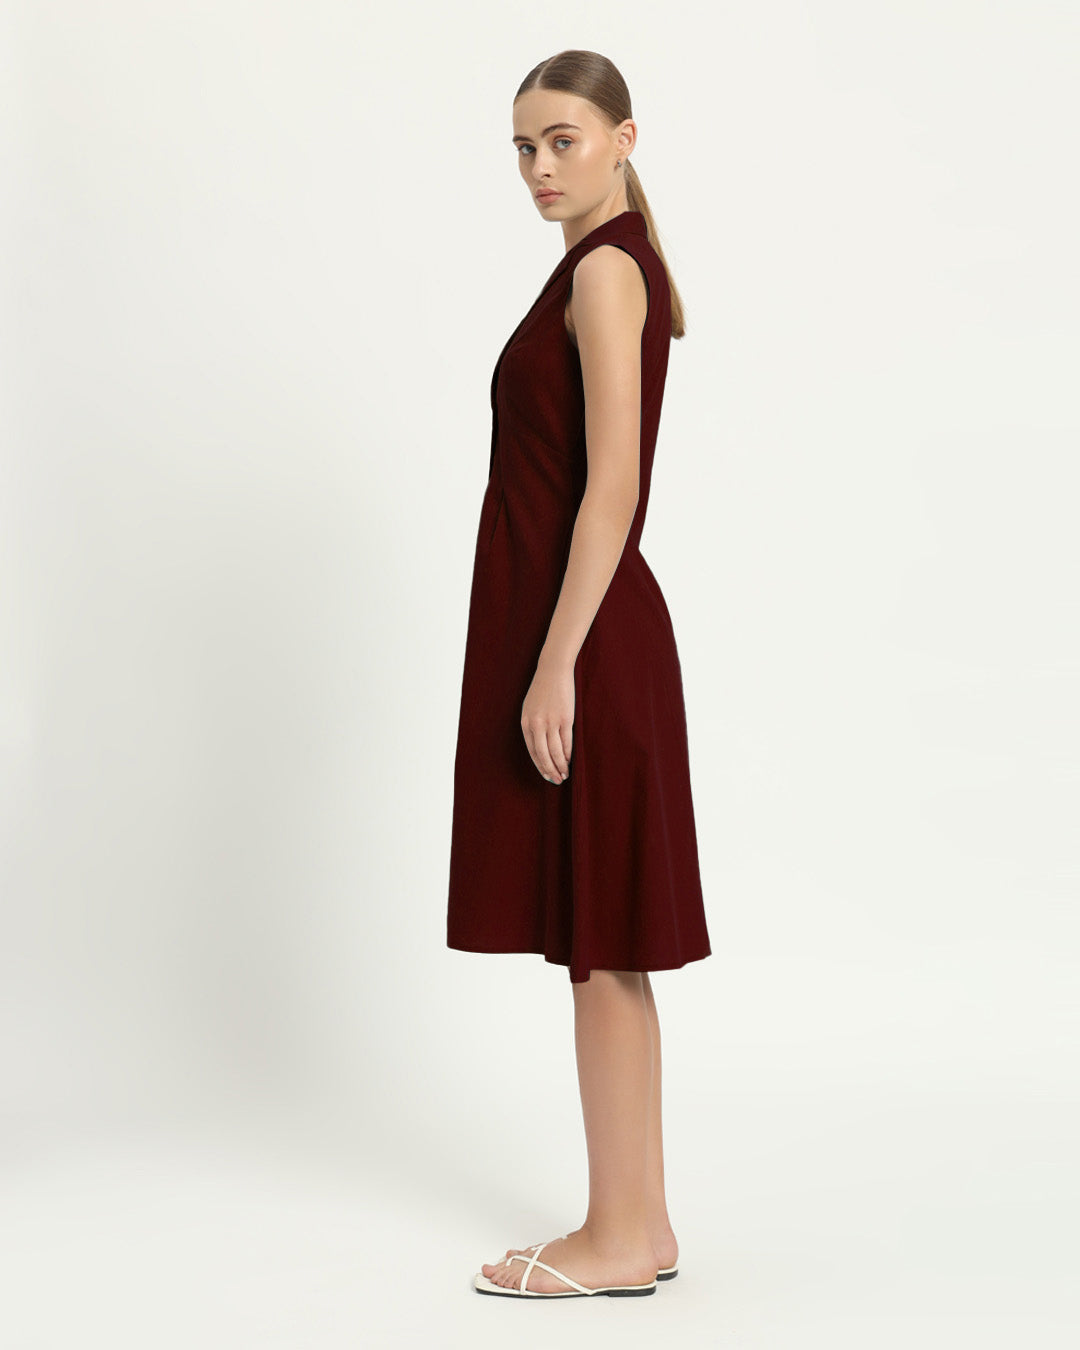 The Germering Rouge Cotton Dress